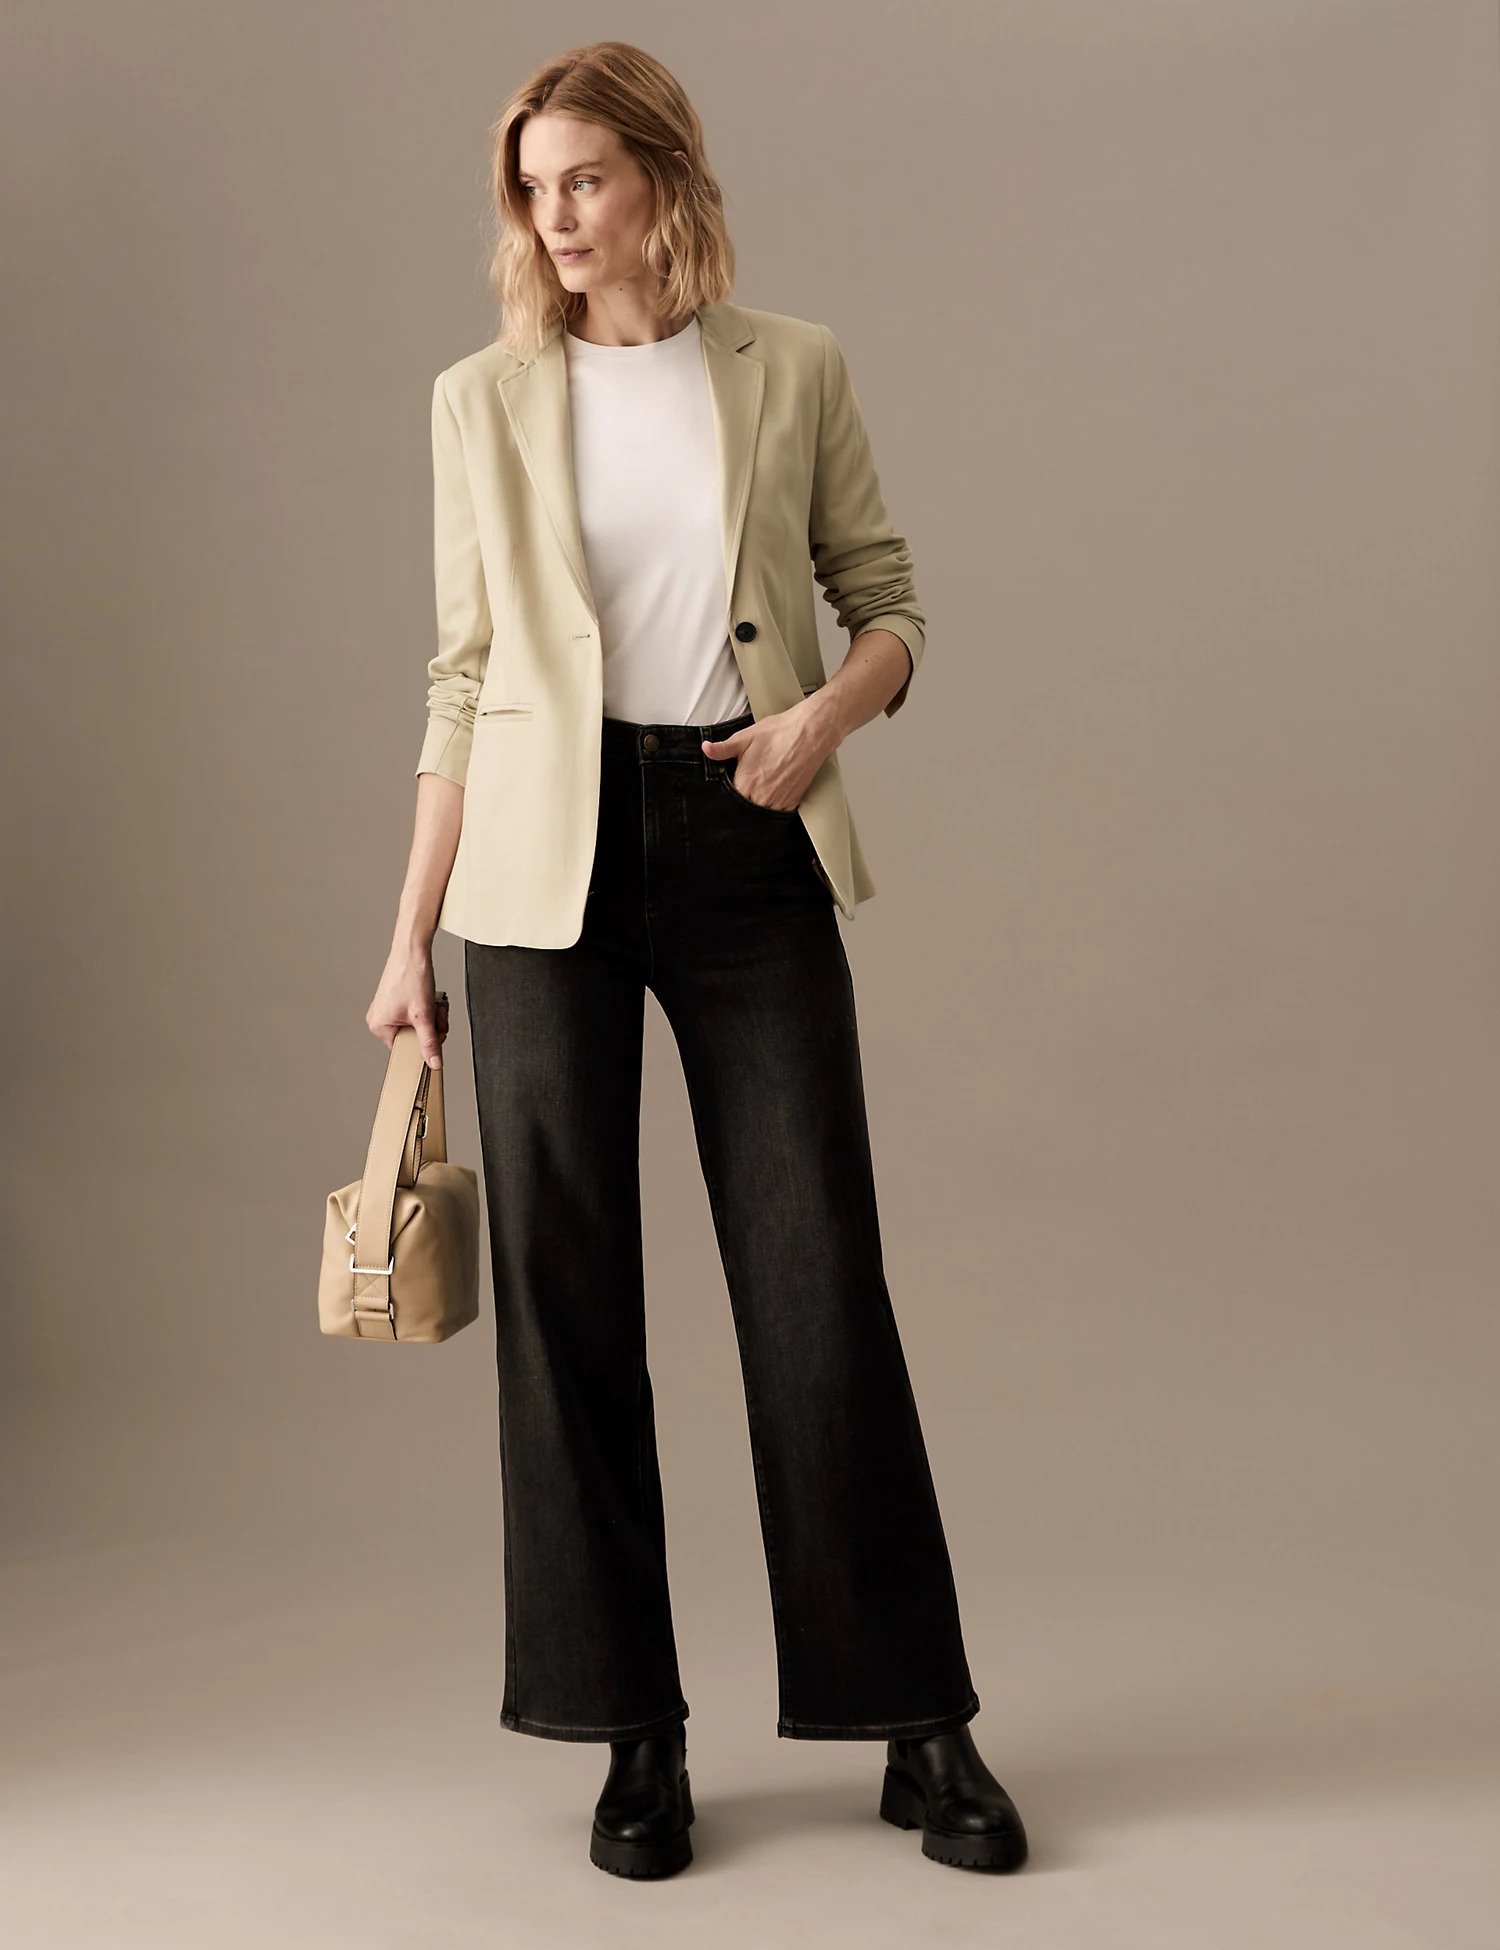 The 8 Best Marks & Spencer Basics to Buy and Love Forever | Who What ...